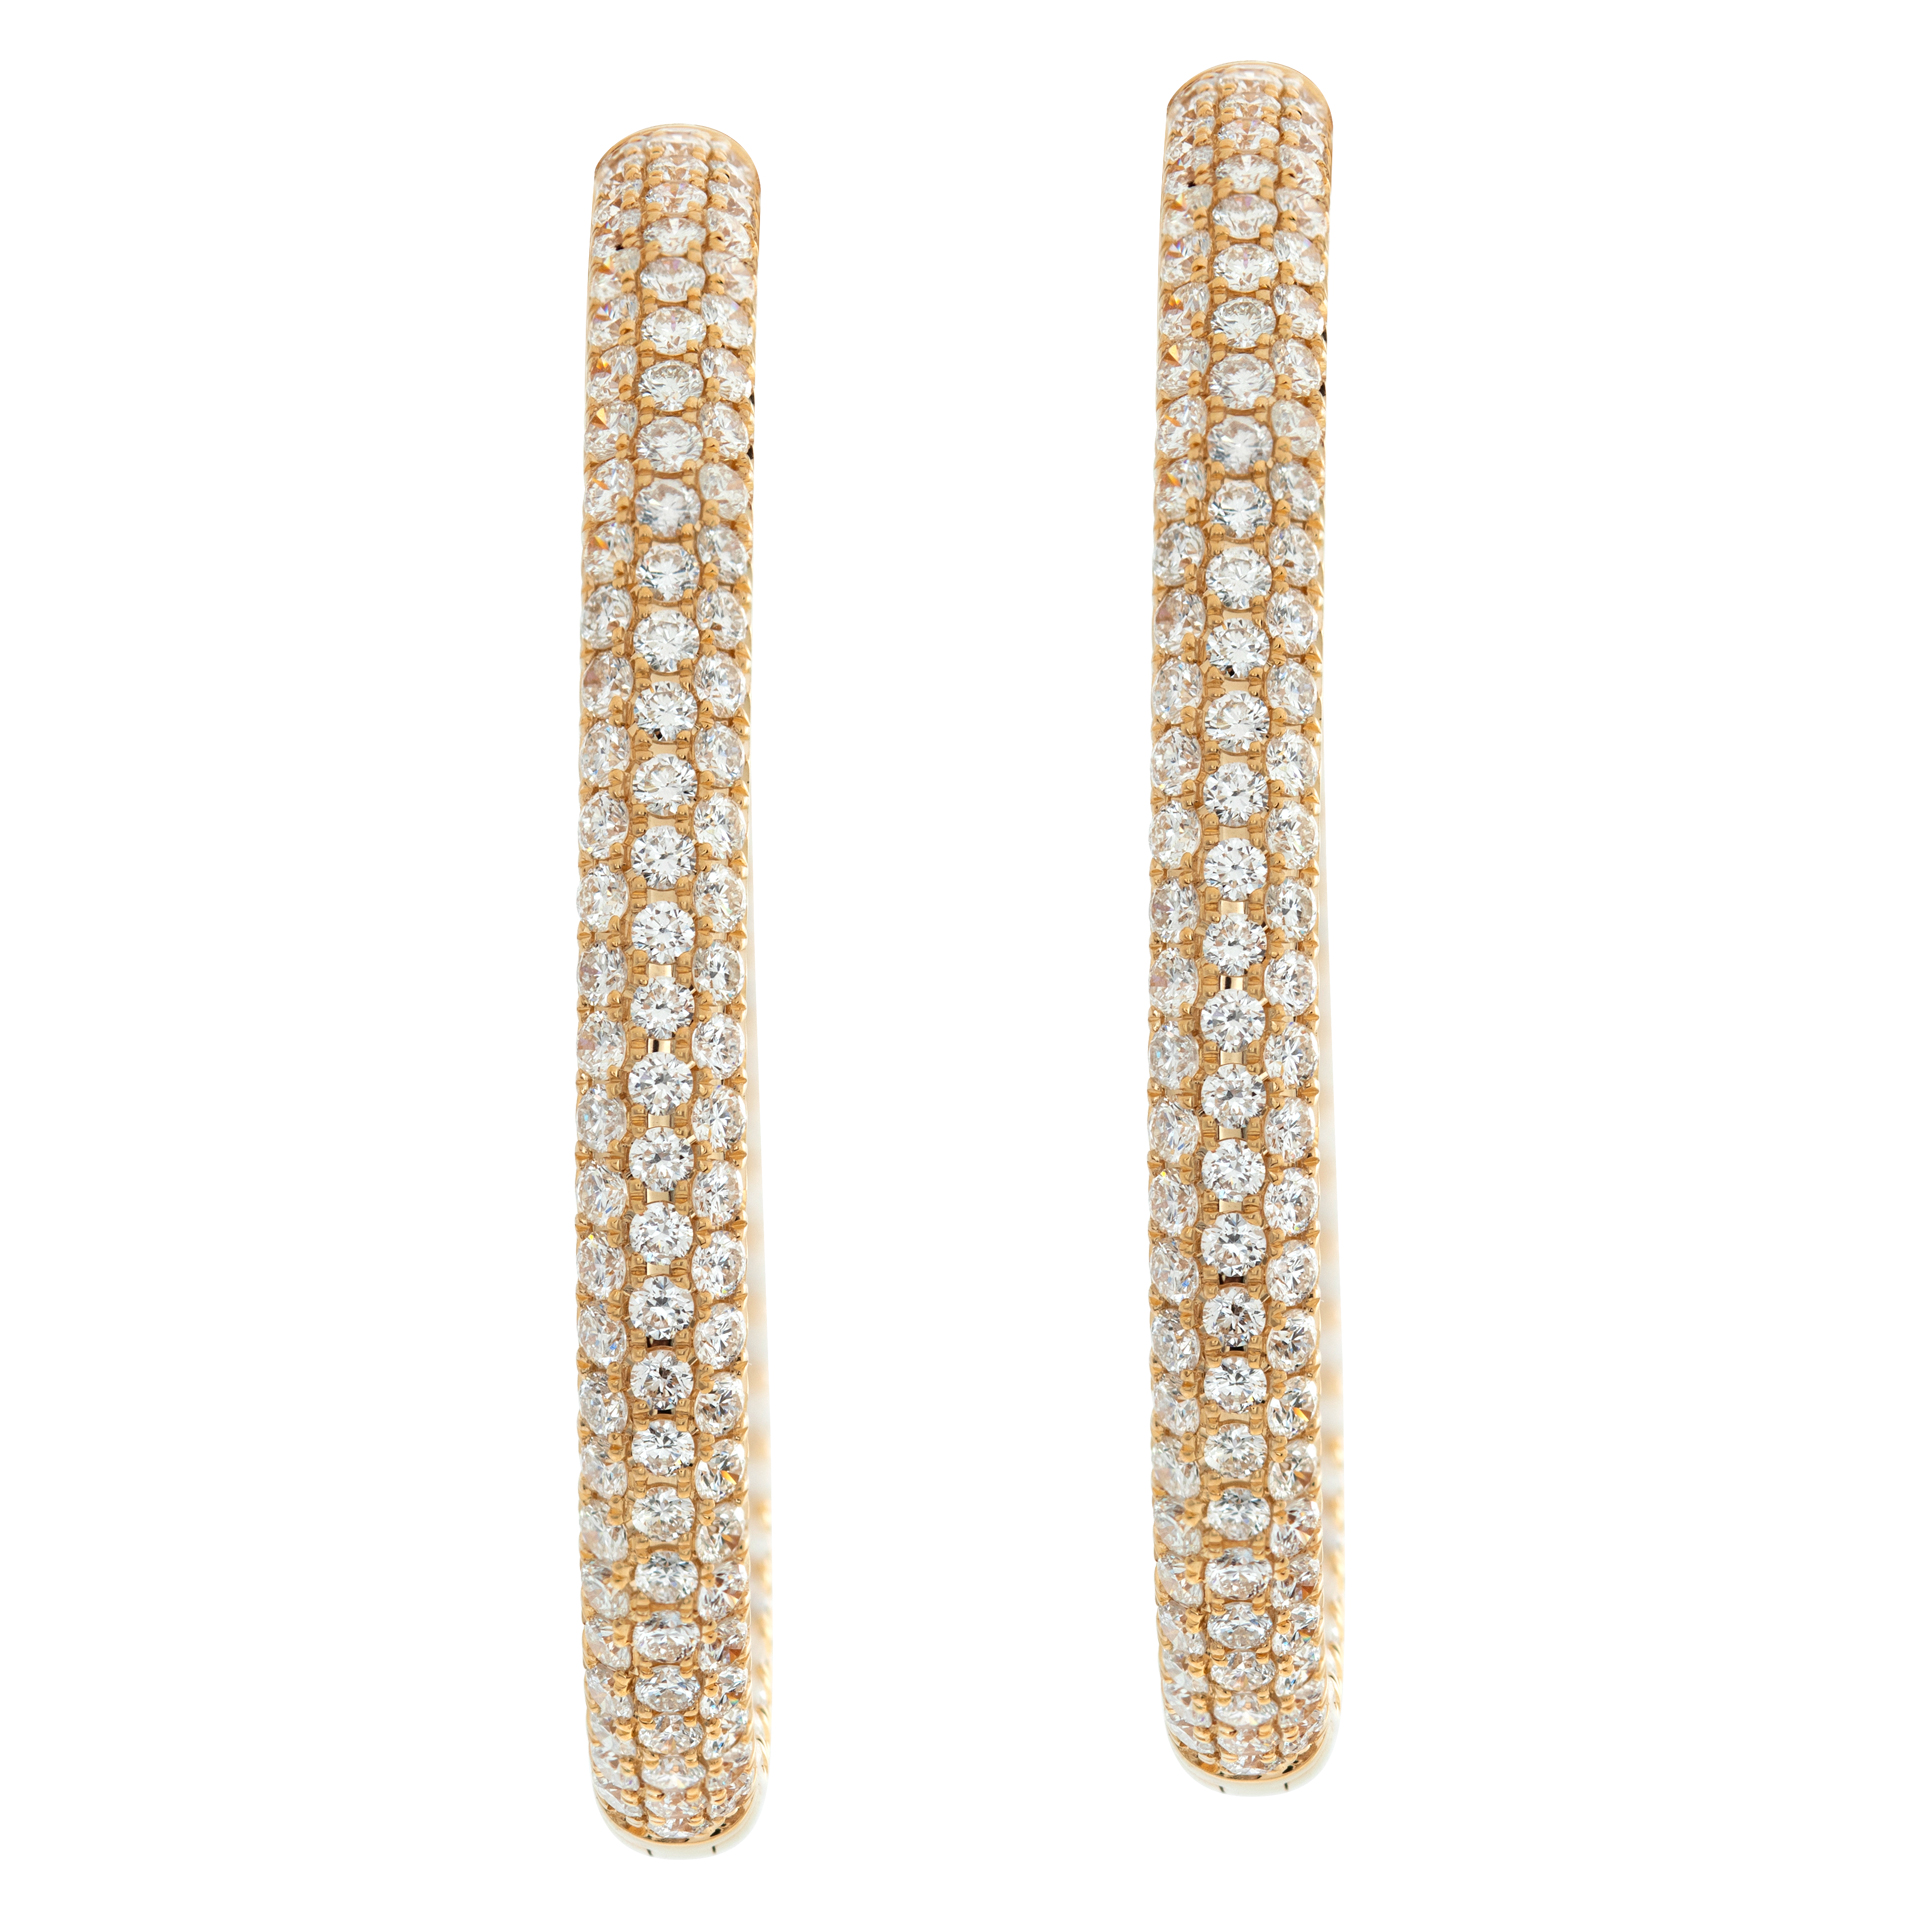 18k yellow gold inside-out pave diamond hoops with 5.63 carats in round diamonds